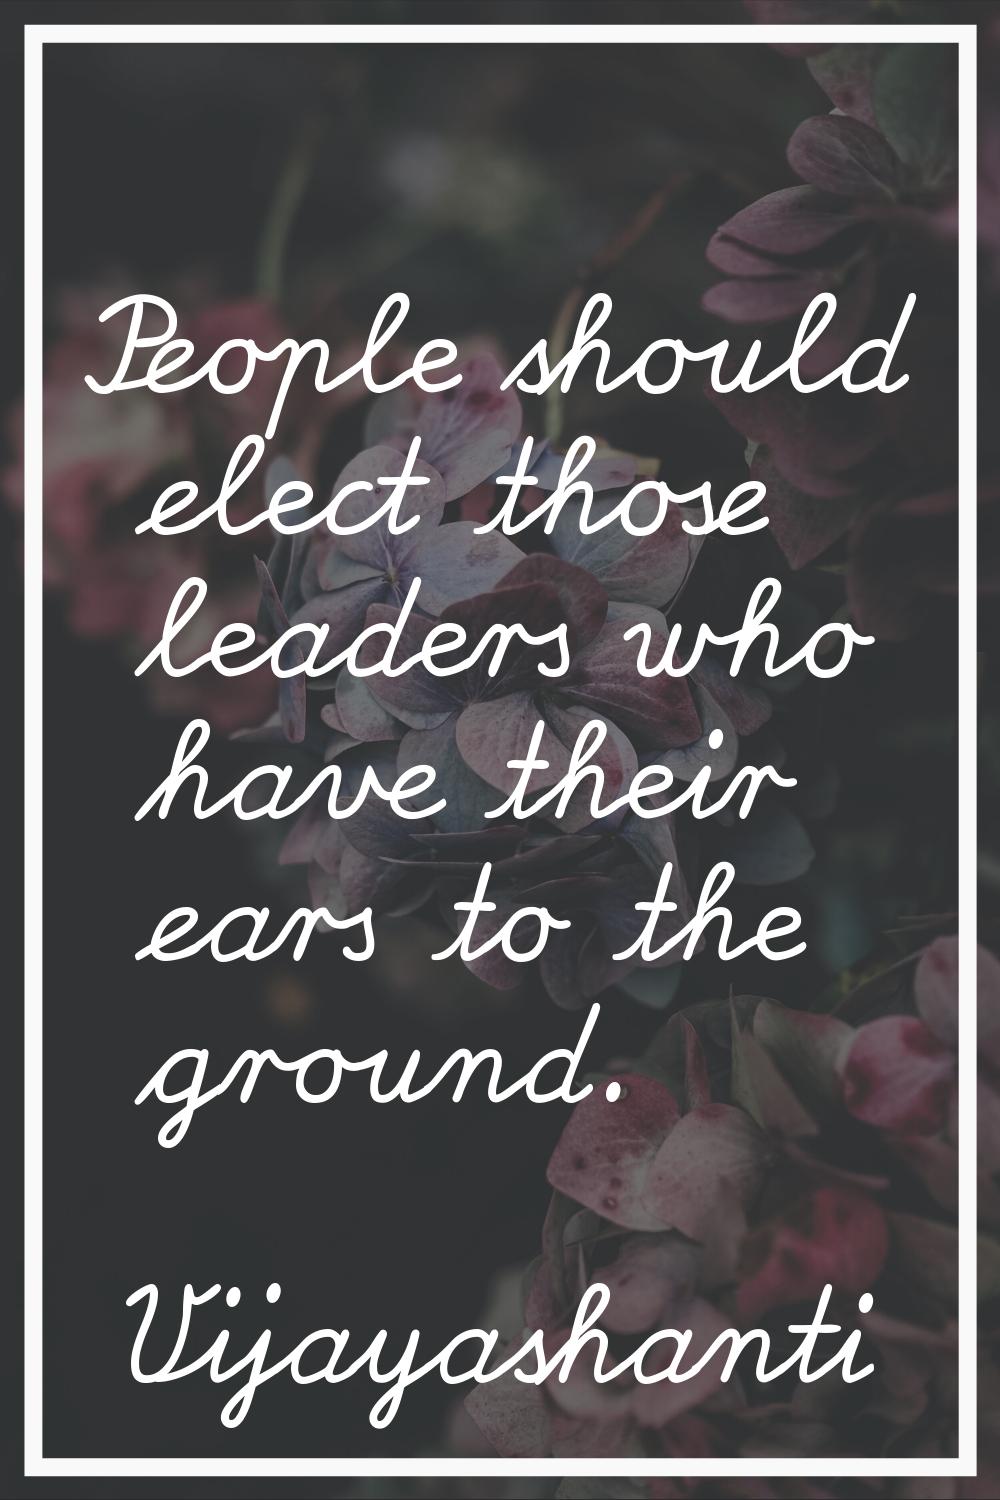 People should elect those leaders who have their ears to the ground.